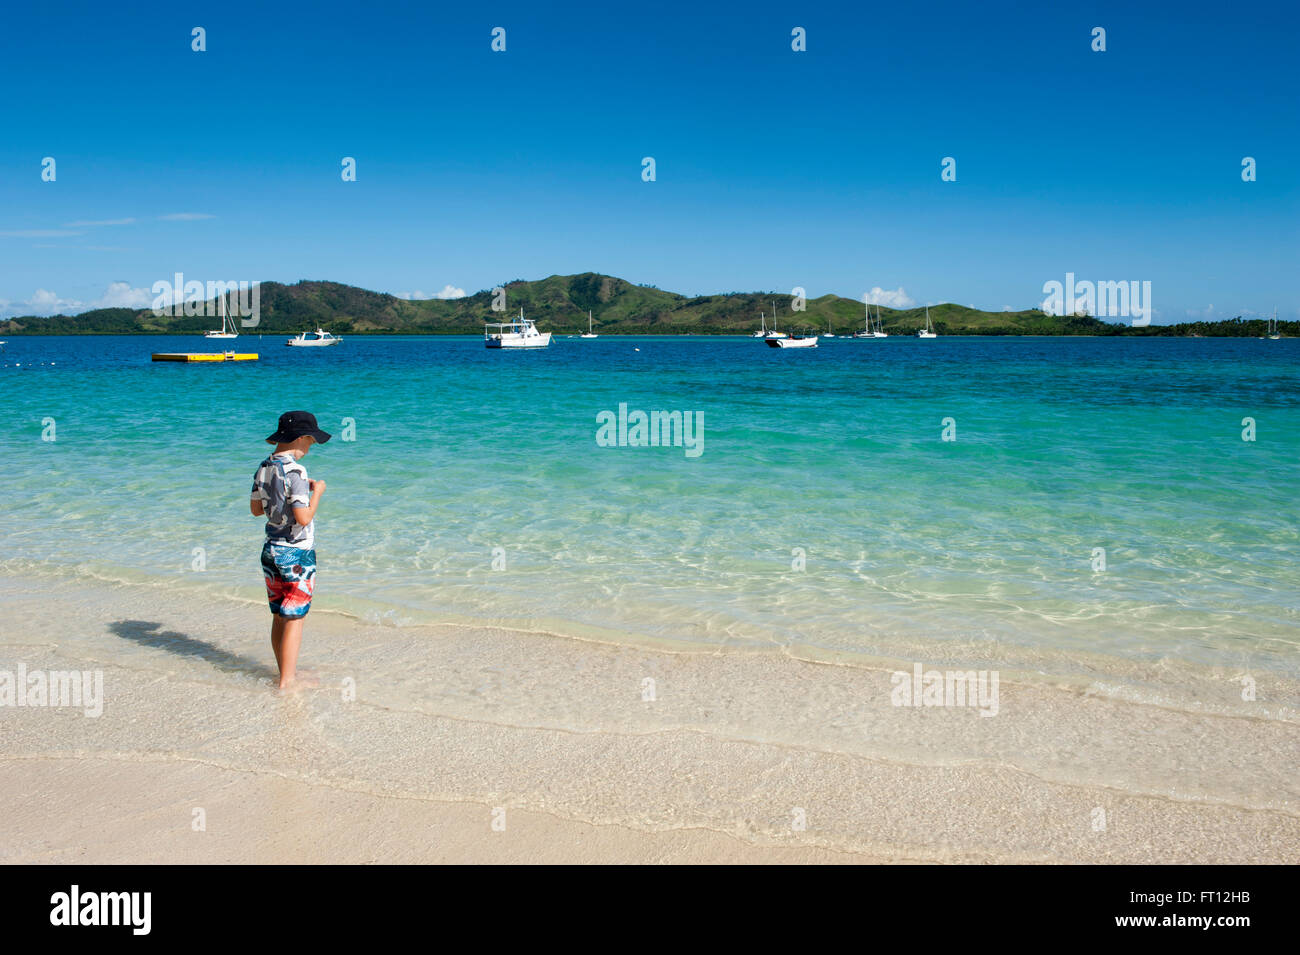 A woman standing in water on the beach with boats in the distance, Malolo Lailai island, Mamanuca Islands, Fiji, South Pacific Stock Photo